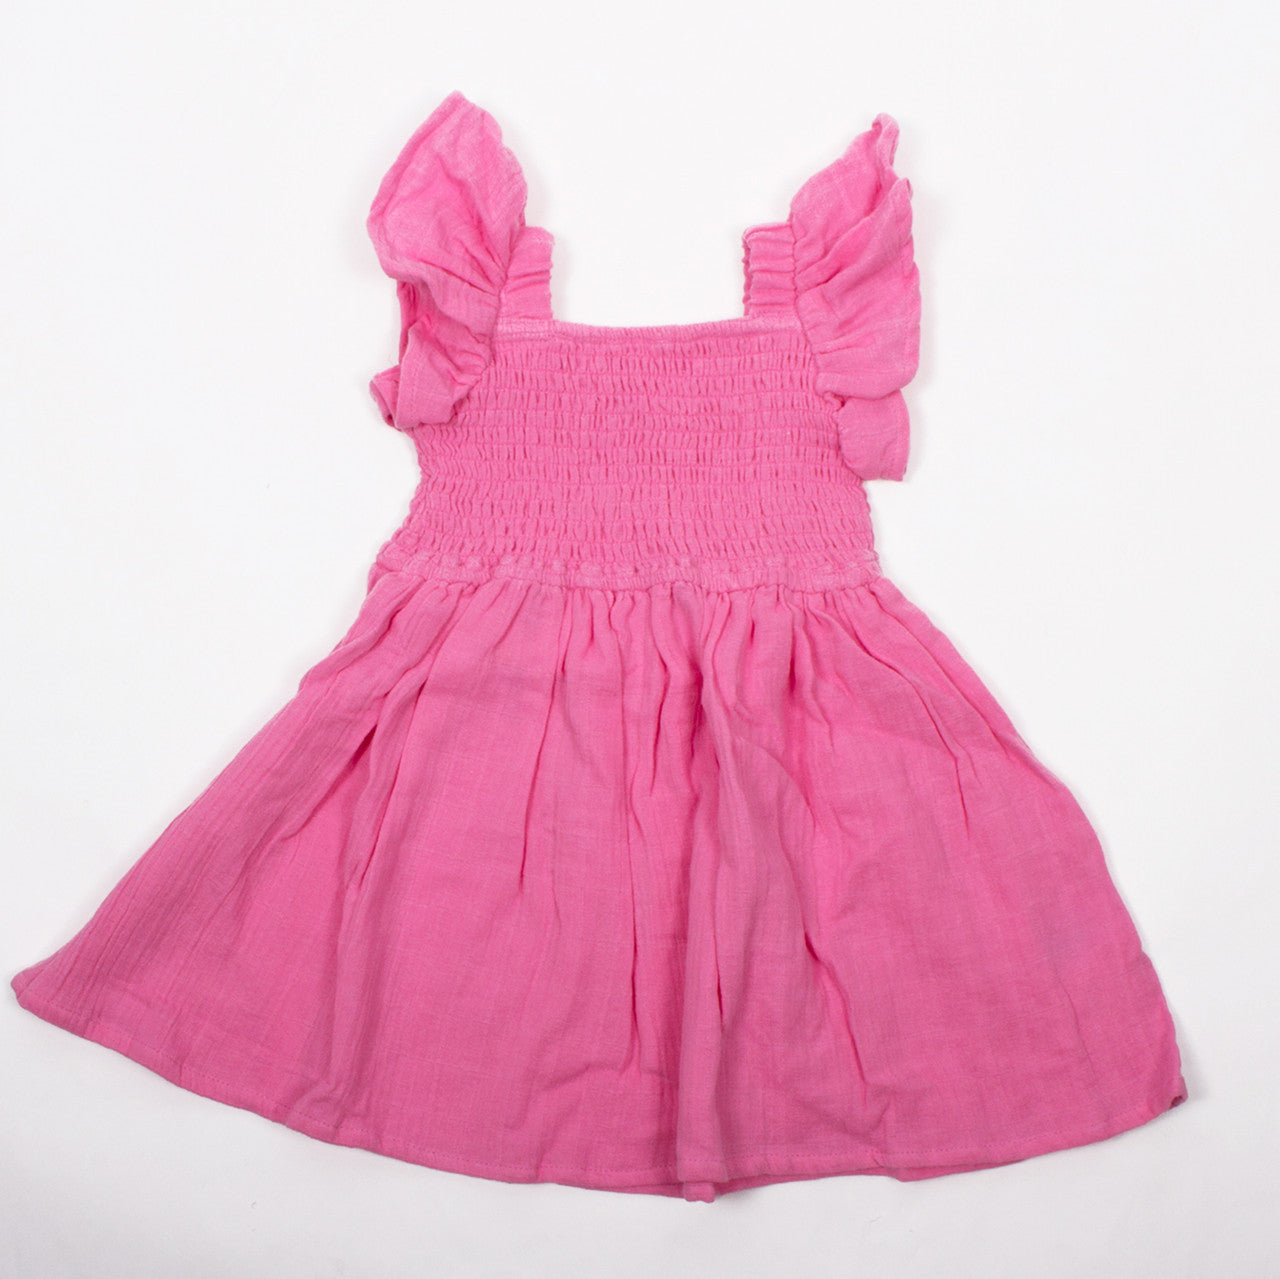 Smocked Cover Up Dress in Pink